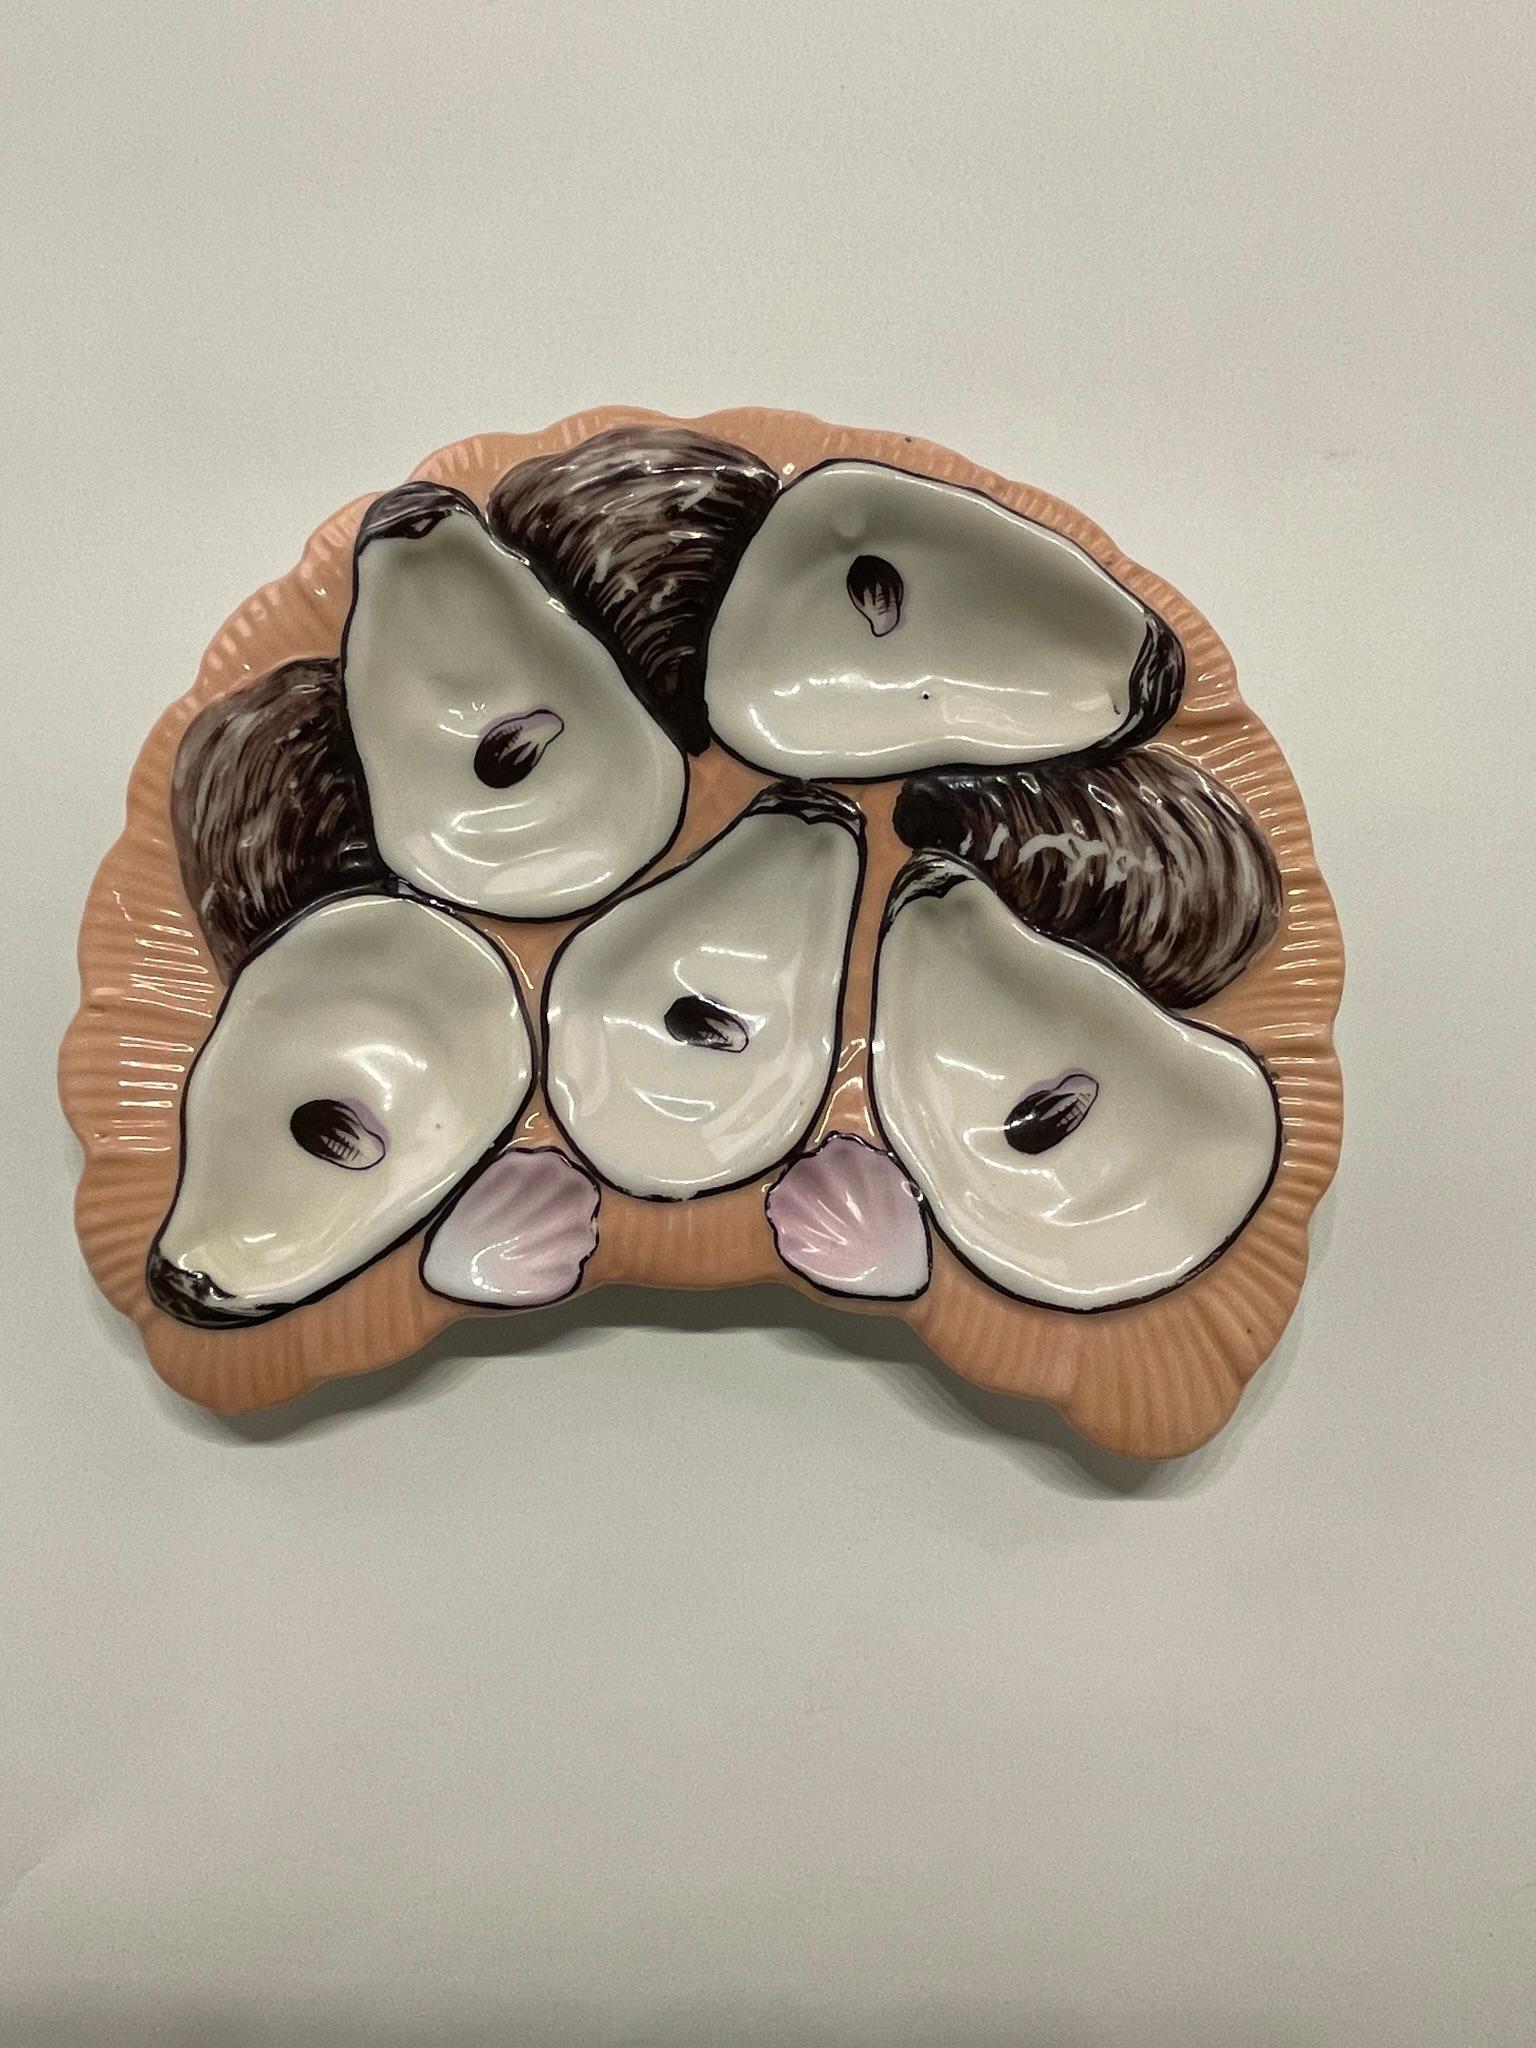 A French Porcelain Oyster plate with 5 oyster shells in good condition with one chip on the back edge. The plate is 8.75